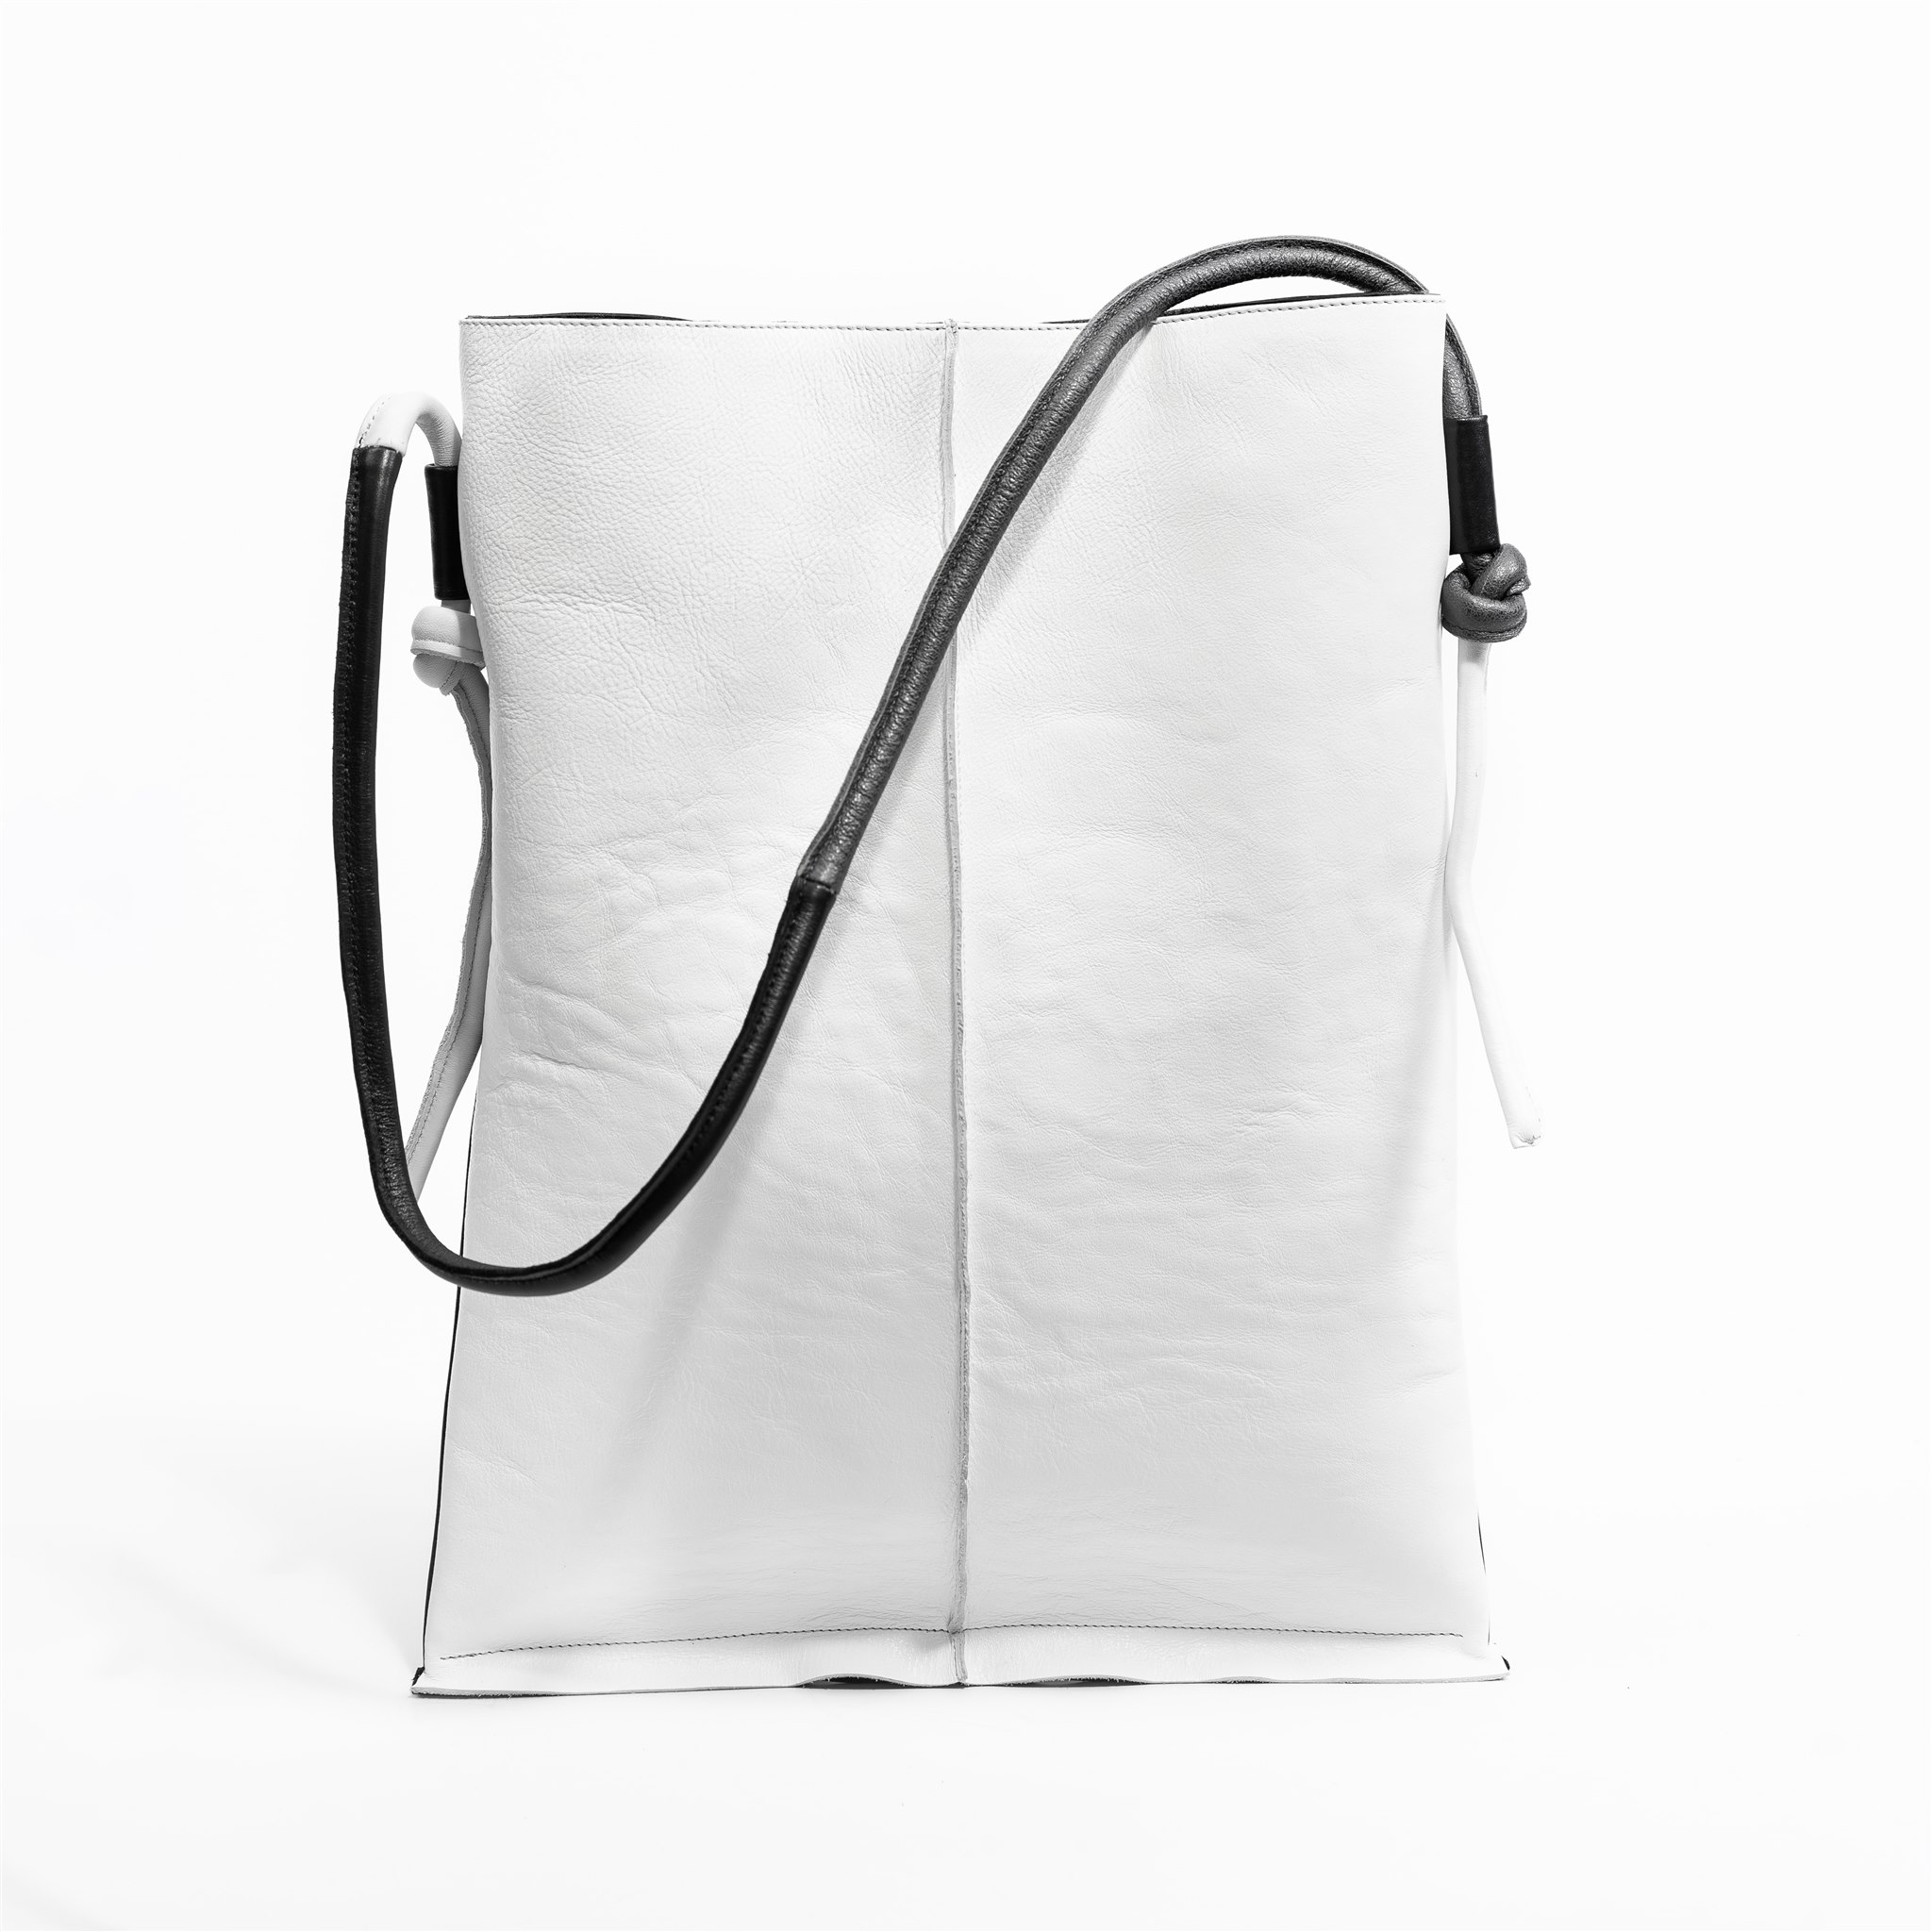 Leather tote bag “SNORRE” By June9Concept